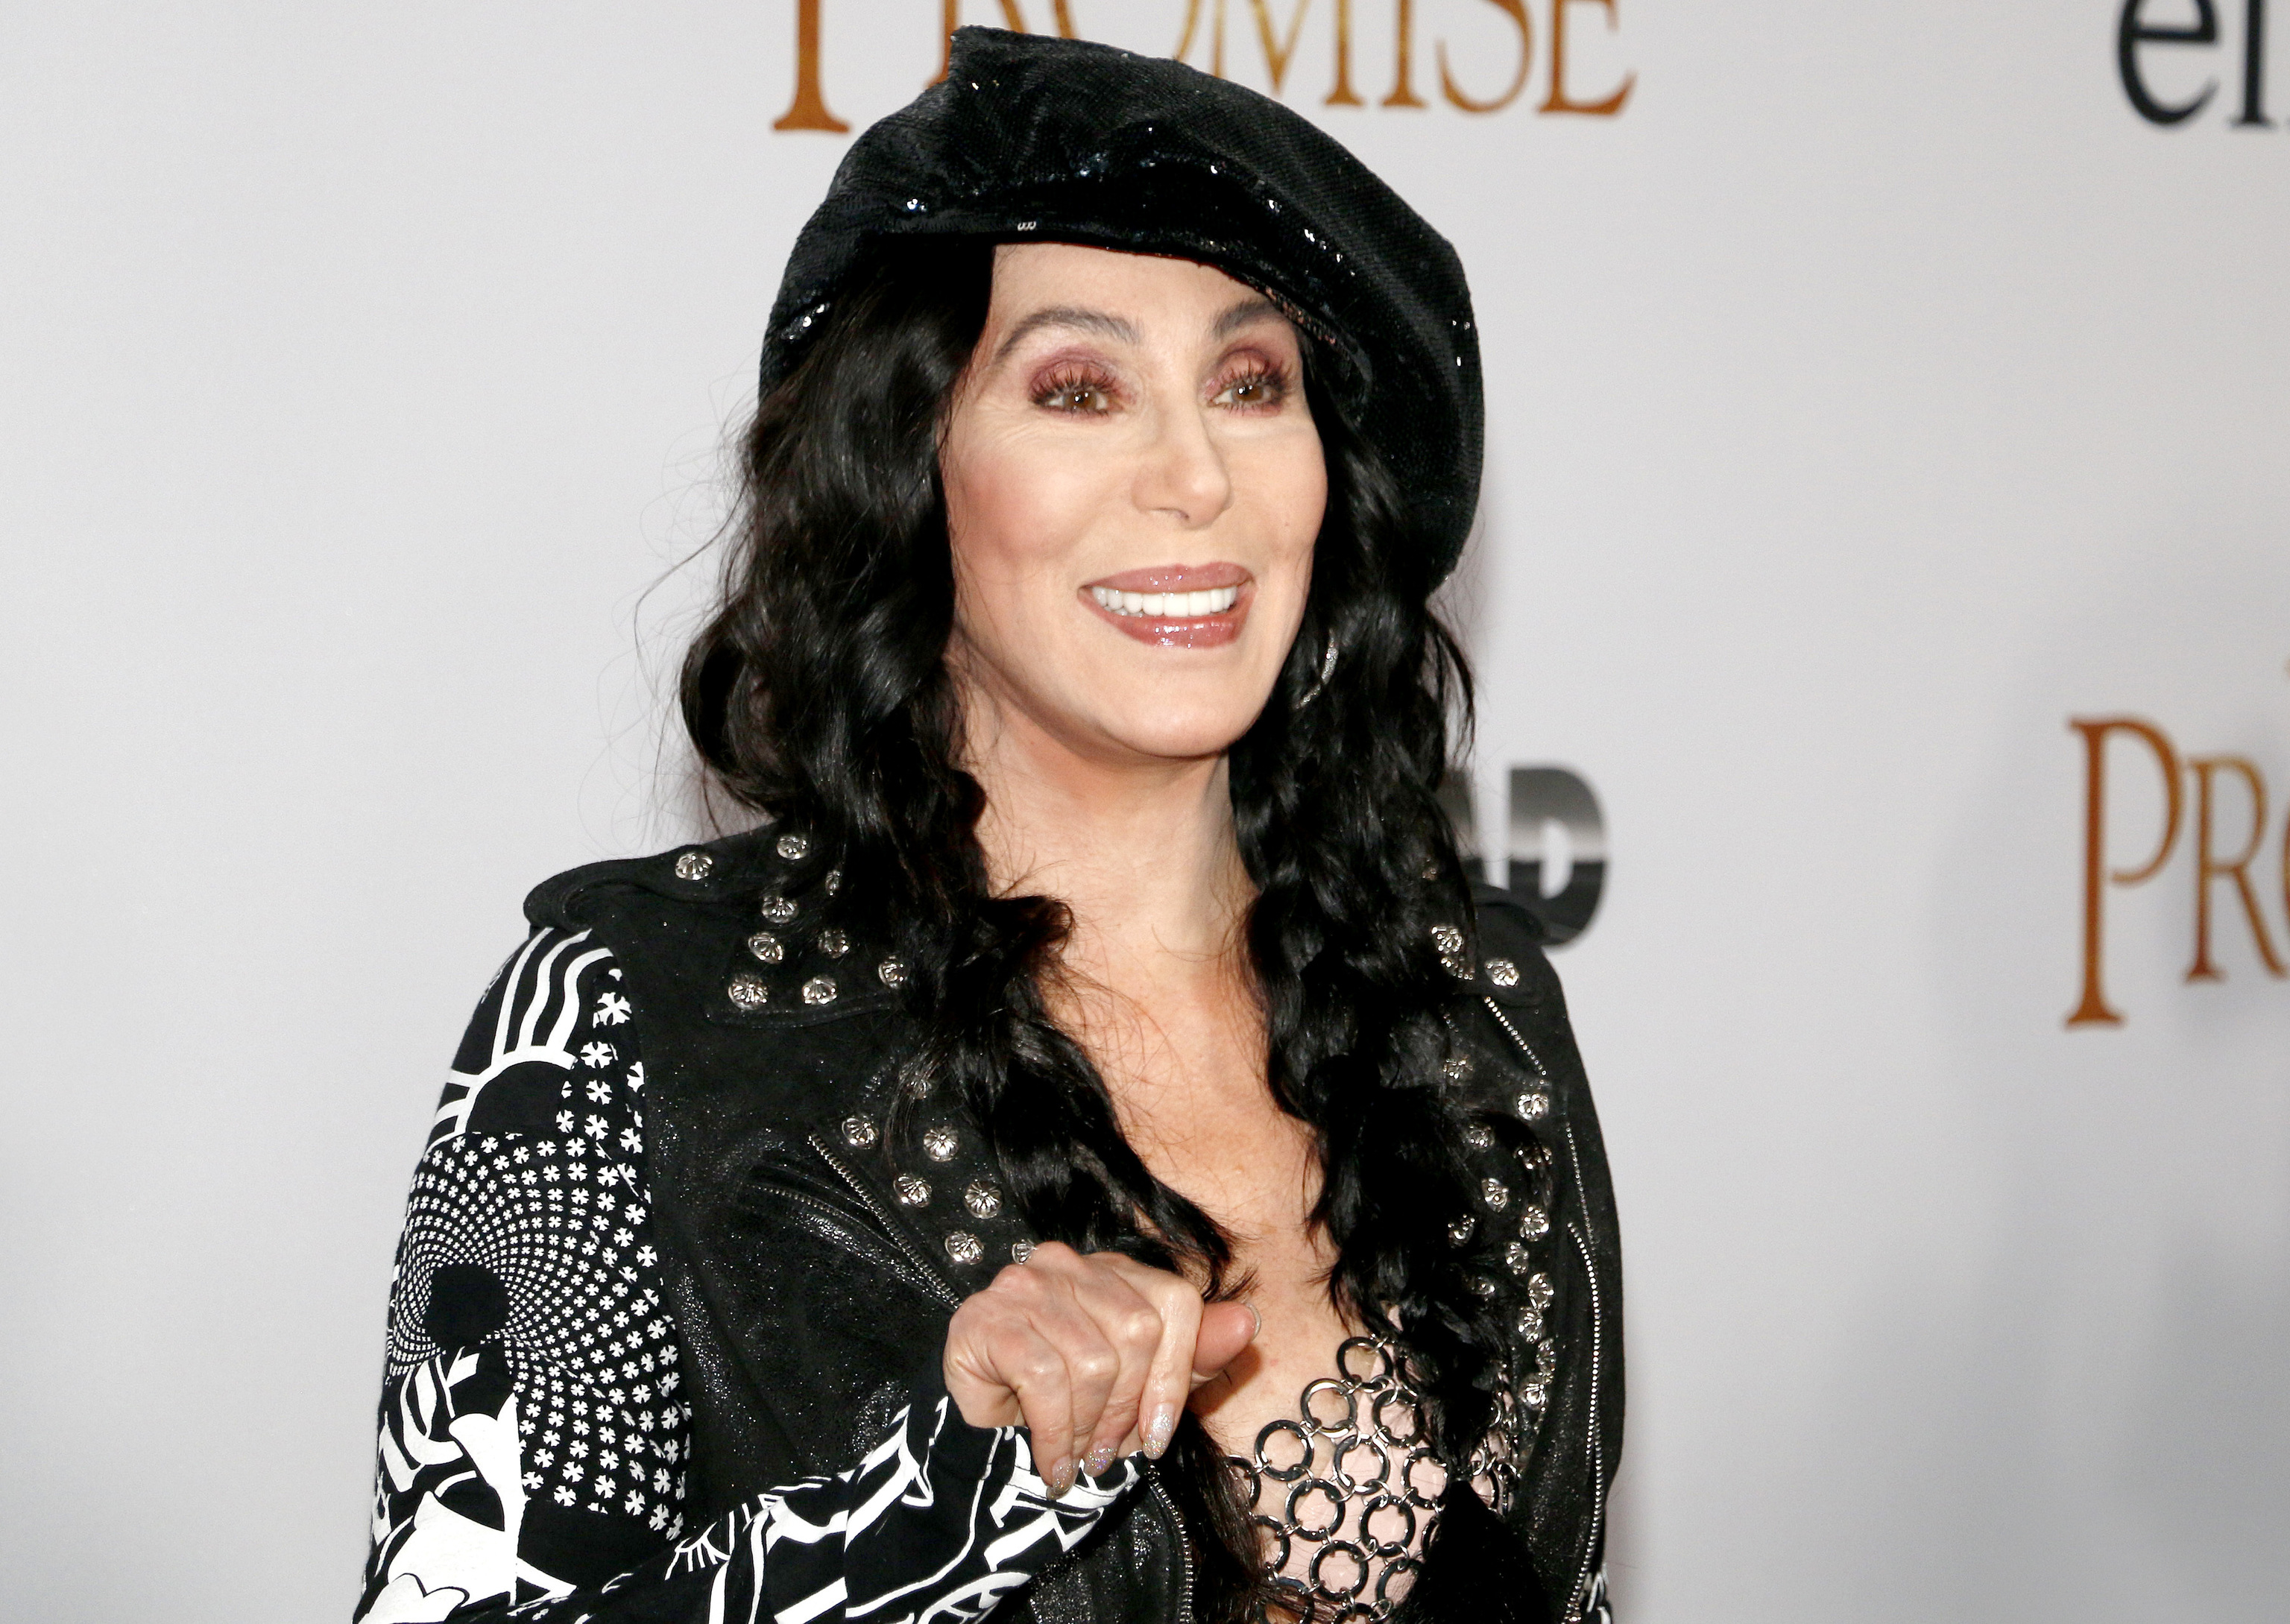 Cher at the LA premiere of 'The Promise' in April 2017.